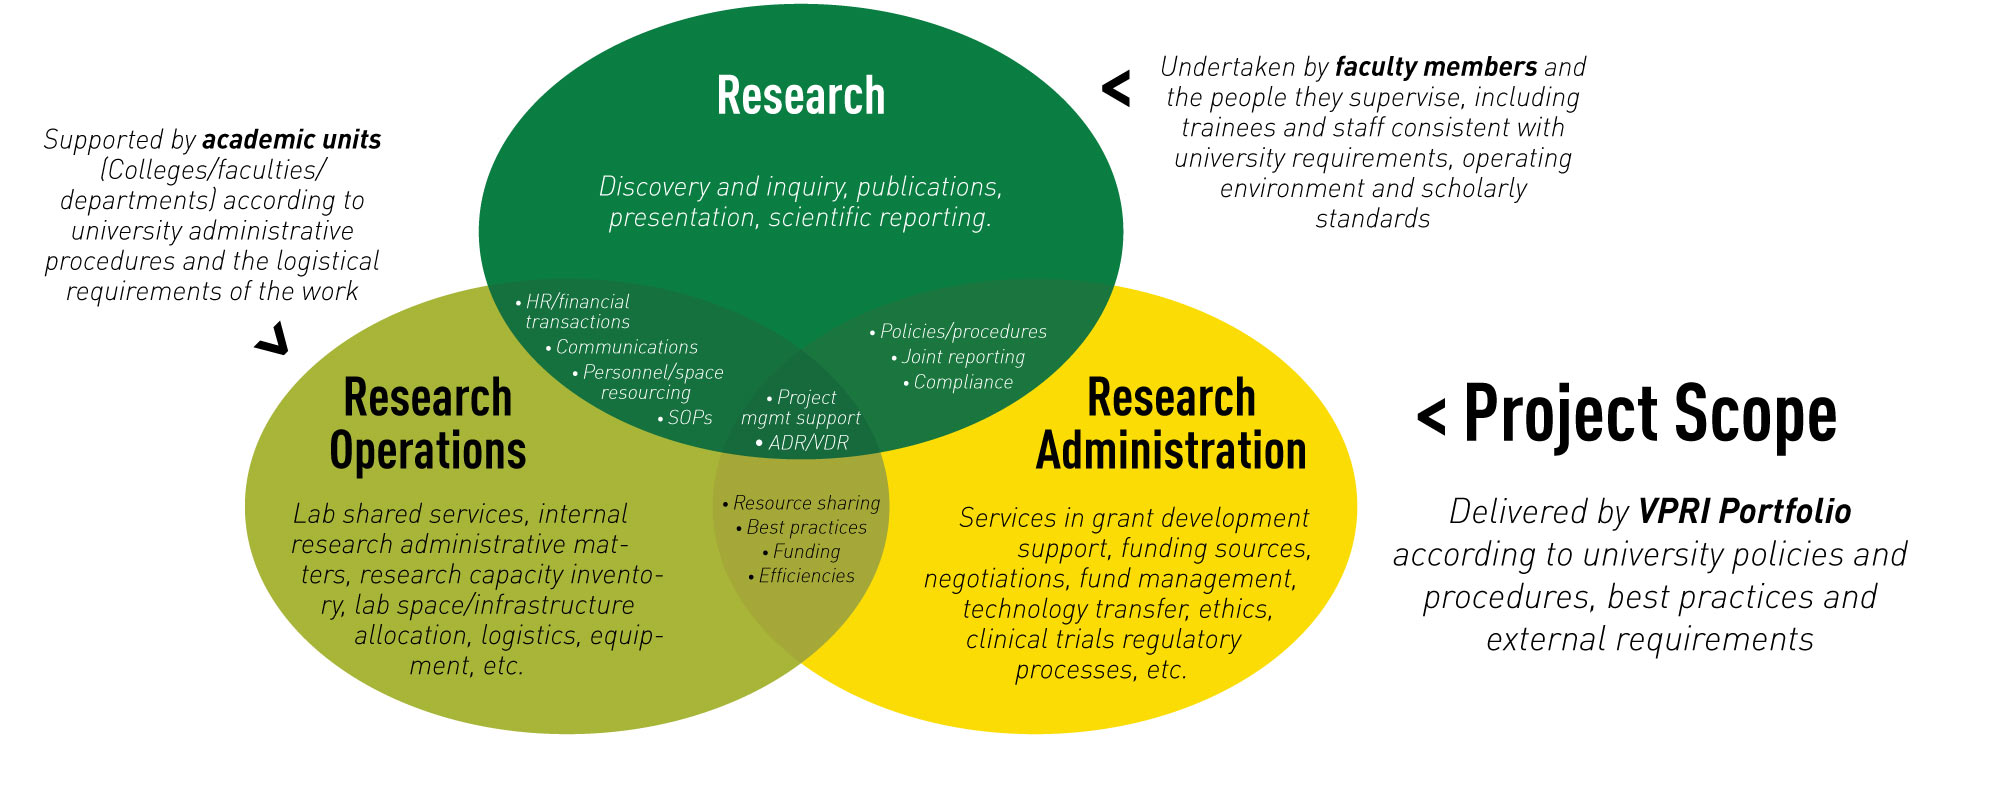 VPRI's role in research operation at the university